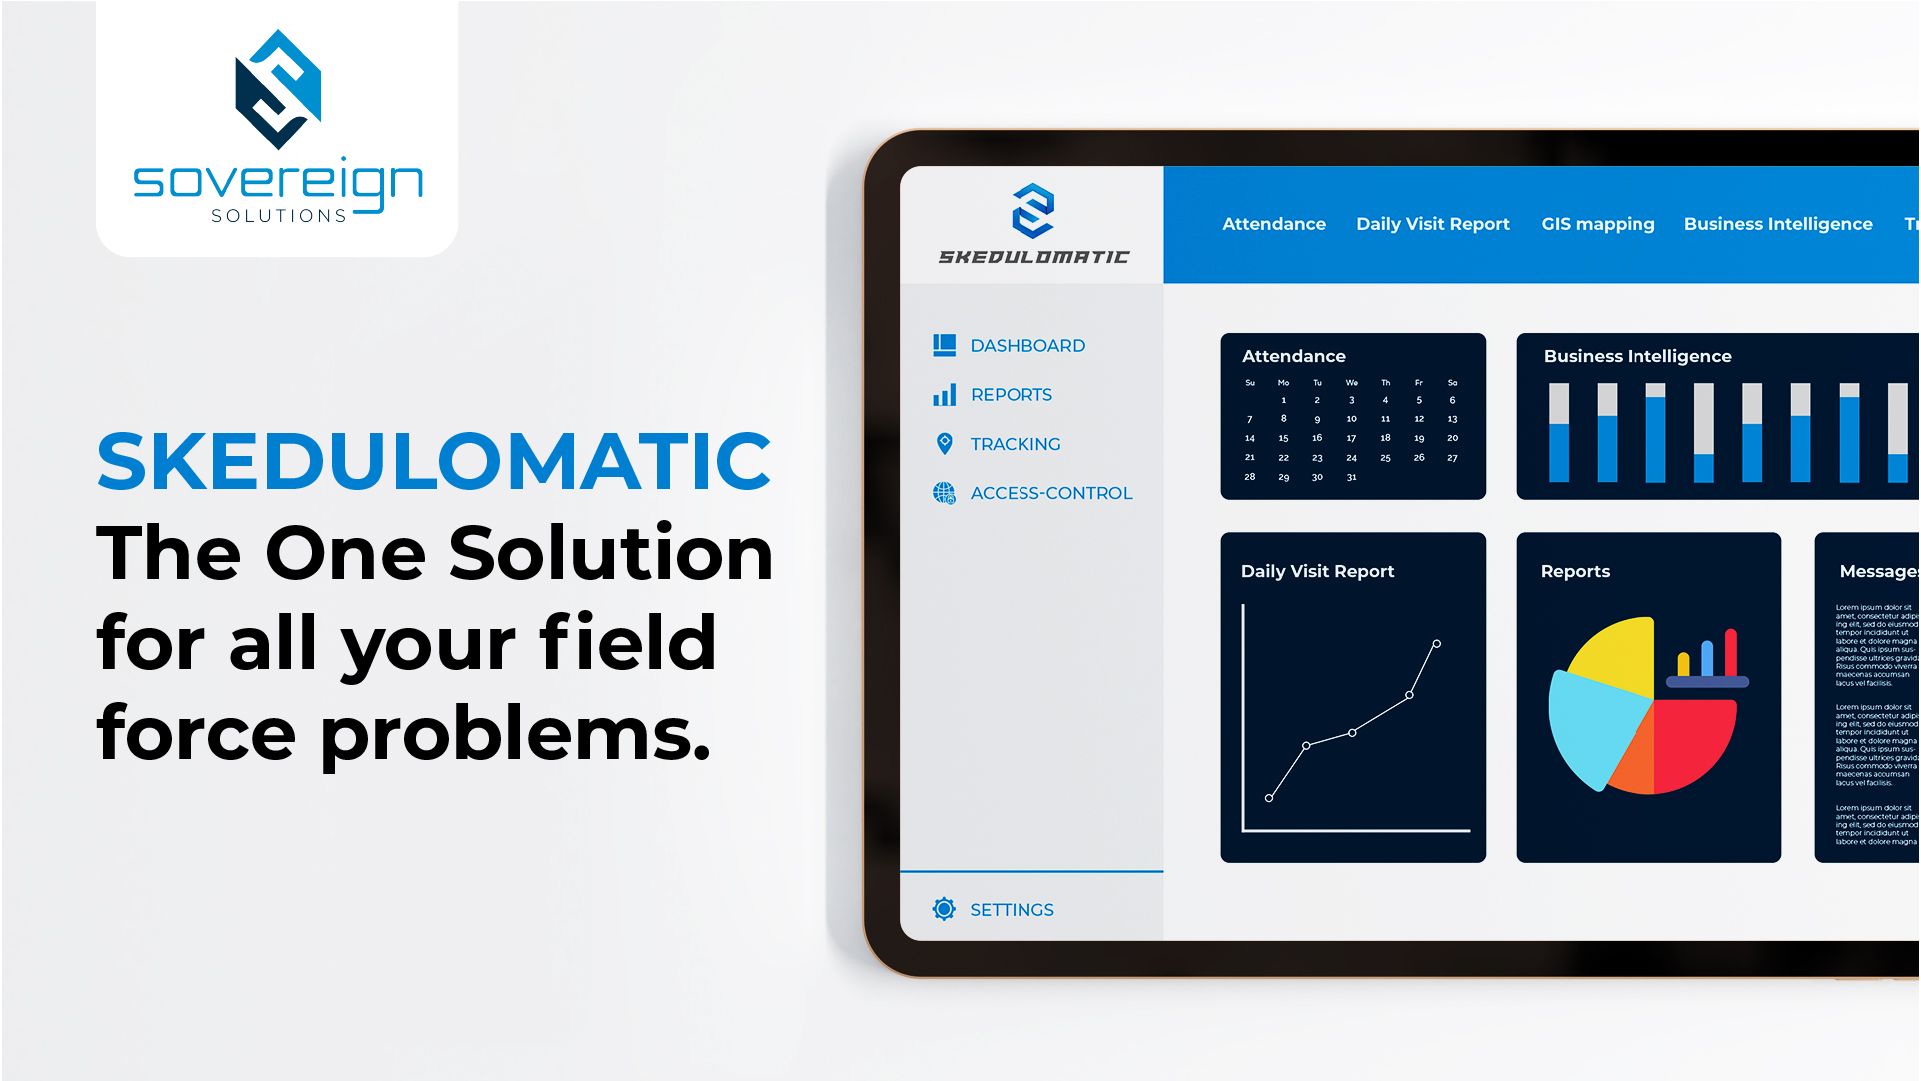 Skedulomatic – The One Solution for all your field force problems